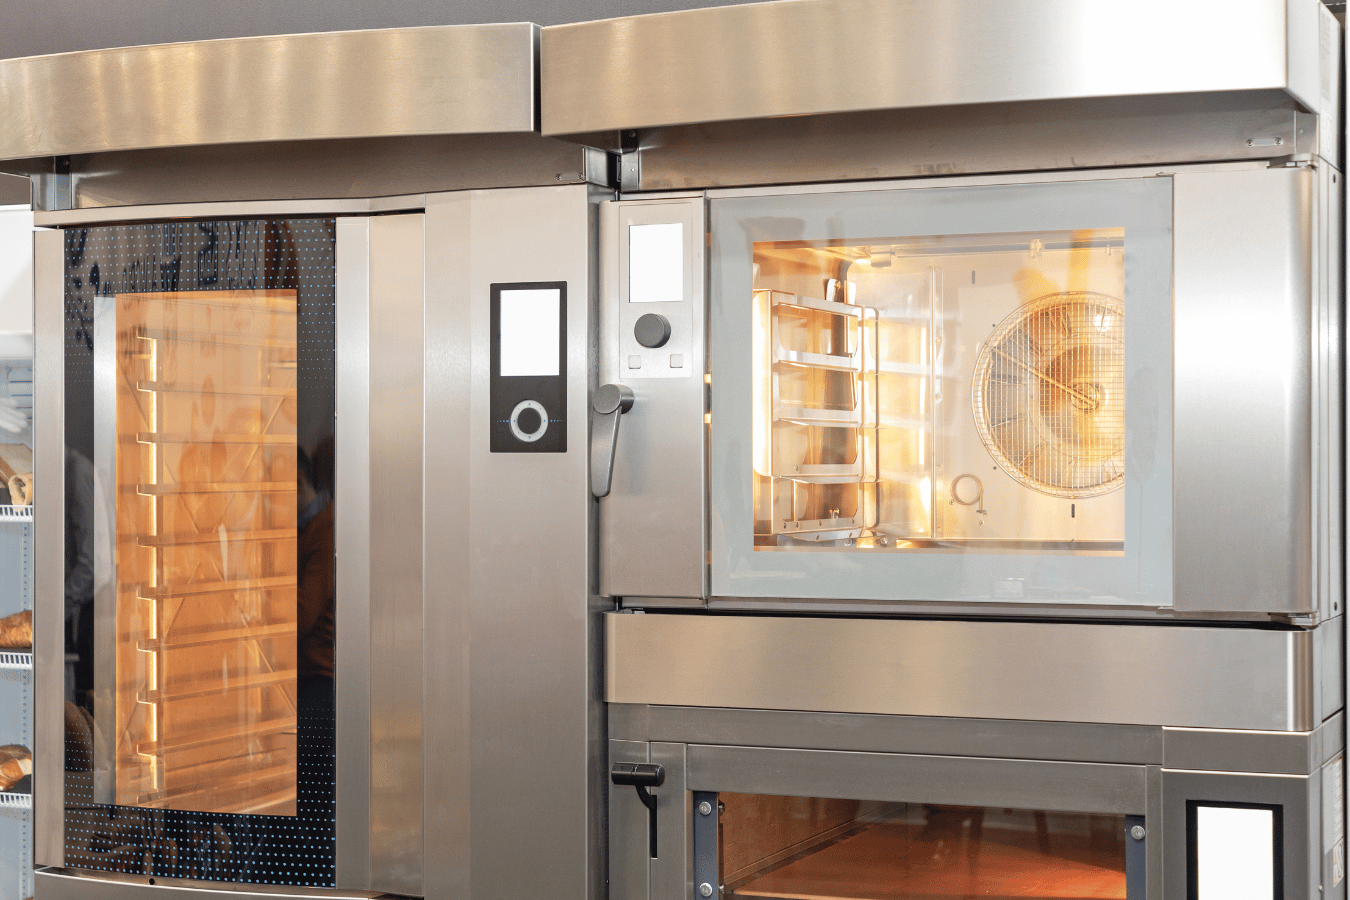 A stainless steel oven is sitting next to another oven in a kitchen.